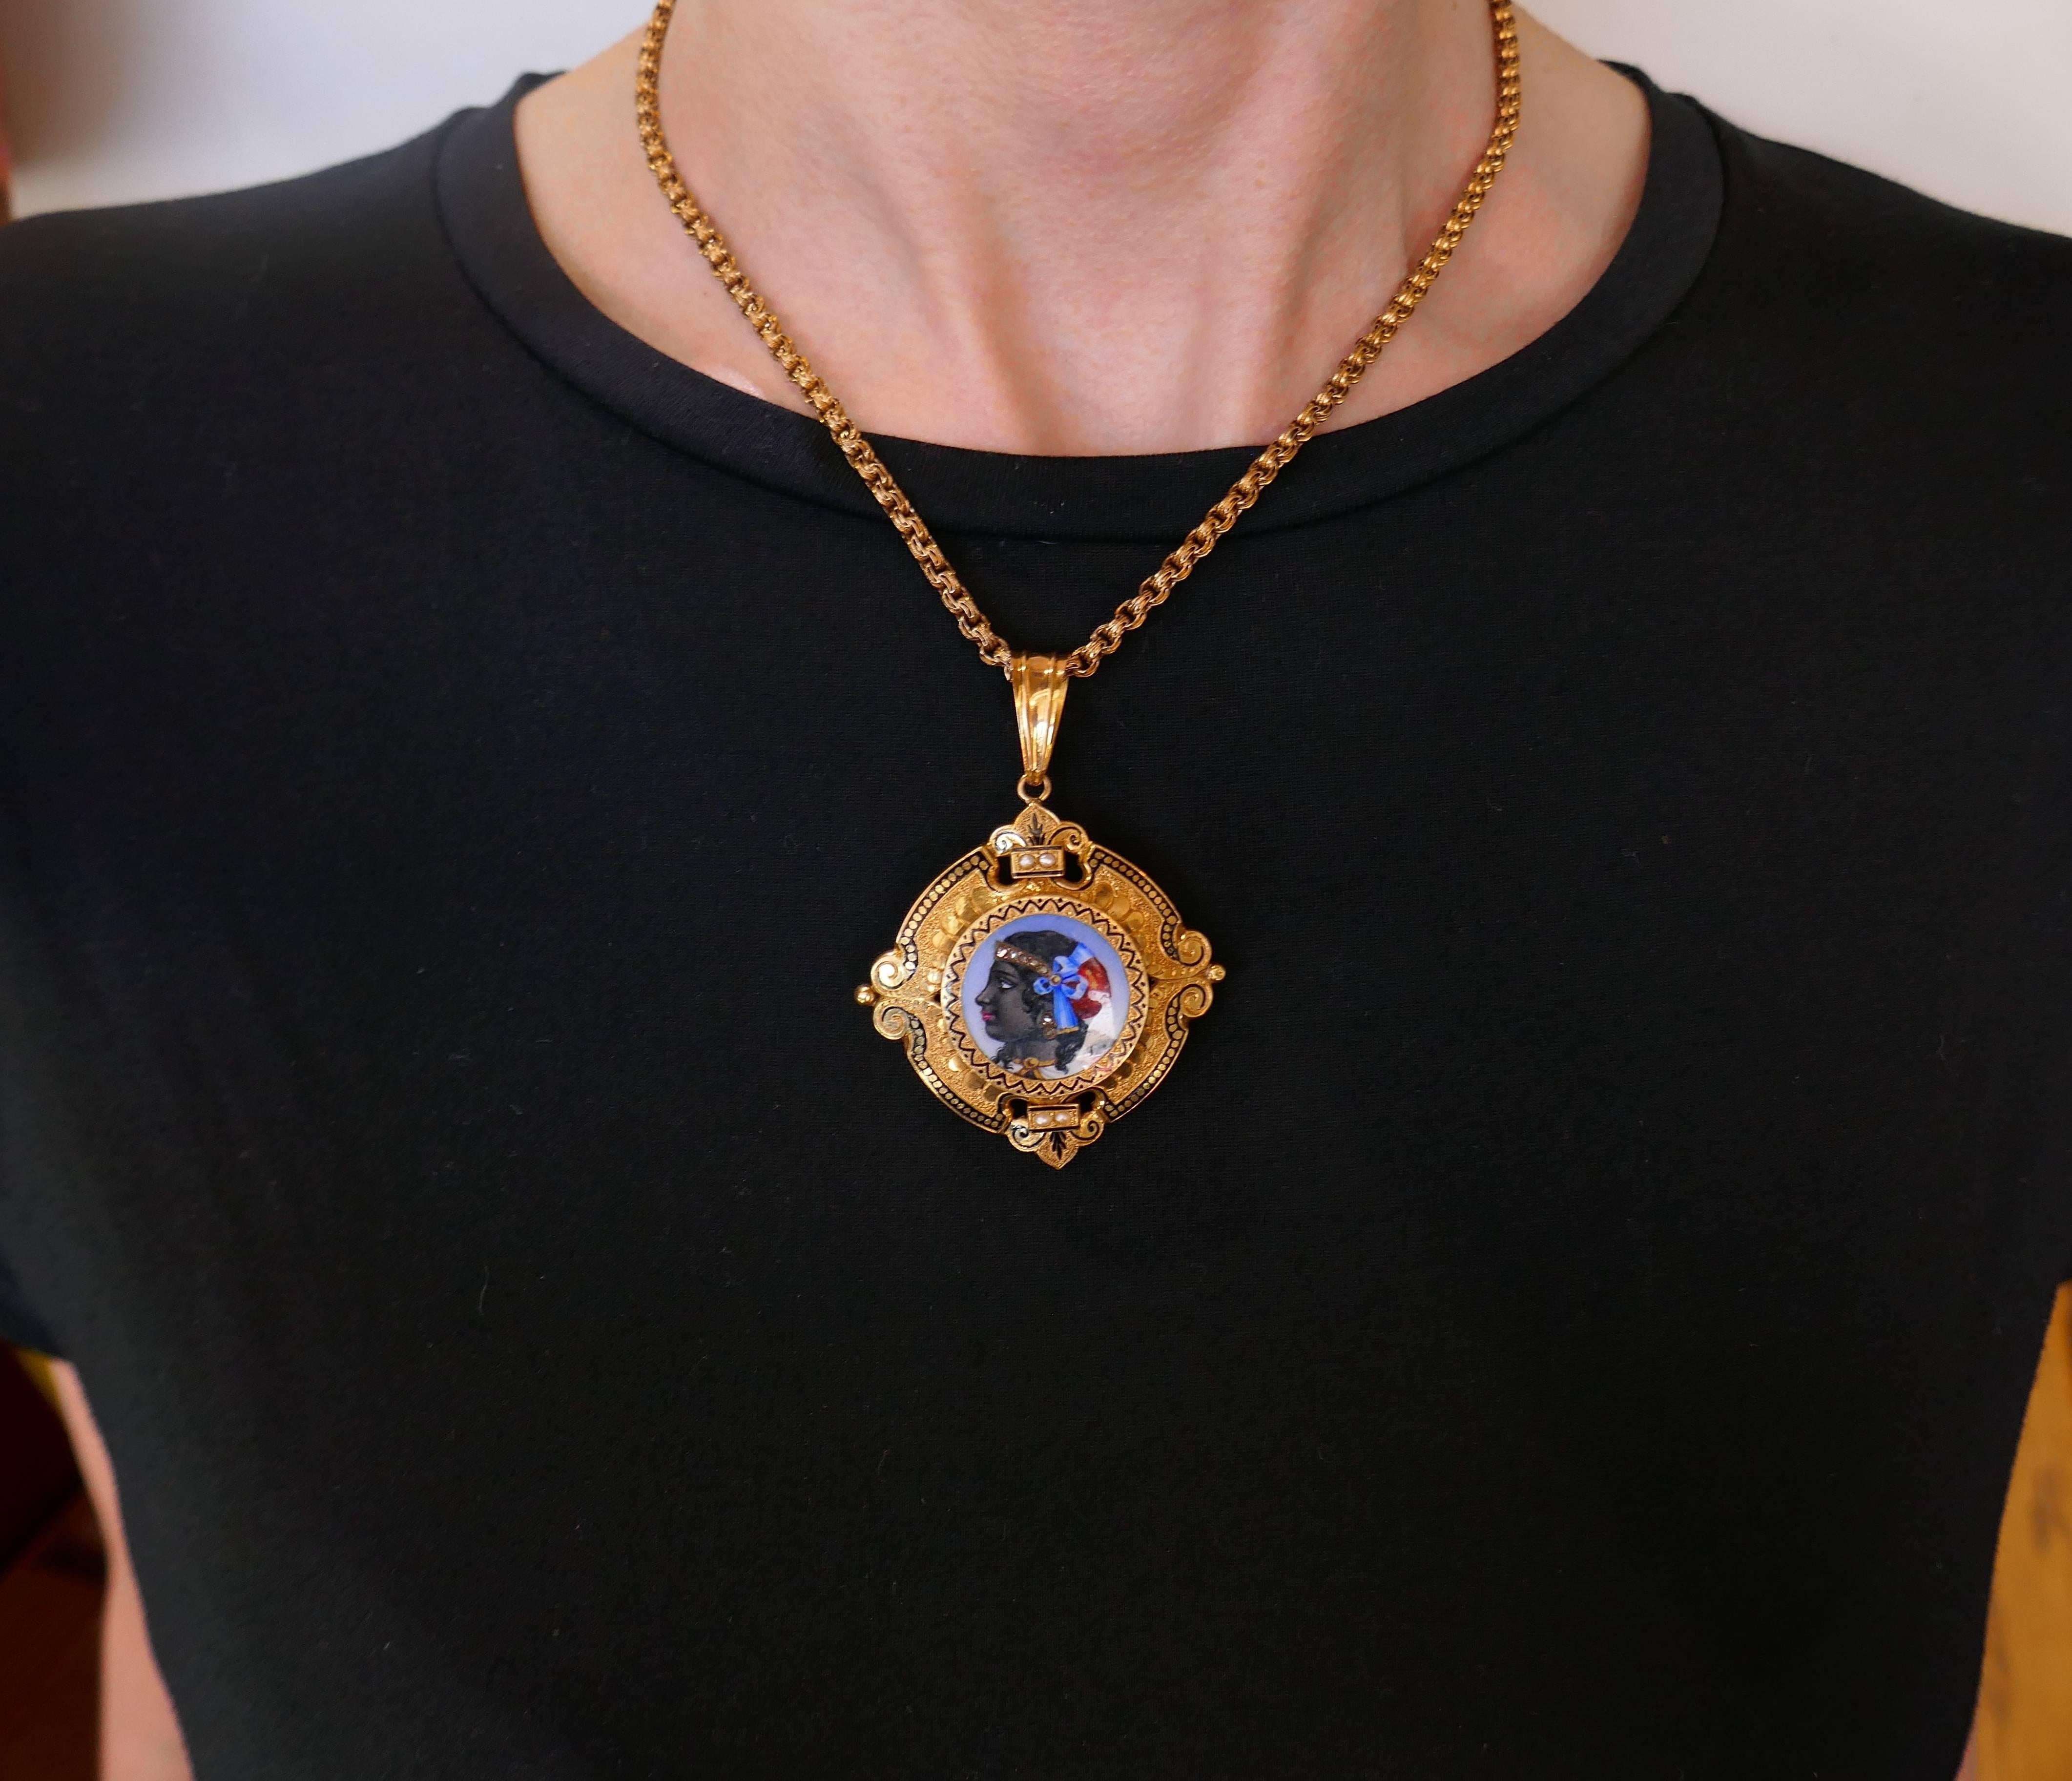 Amazing Victorian pin/necklace created in the 1900's. Features a handmade enamel painting depicting a woman's profile wearing a diamond diadem and earrings, and colorful head scarf. The painting is framed in yellow gold, accented with black enamel